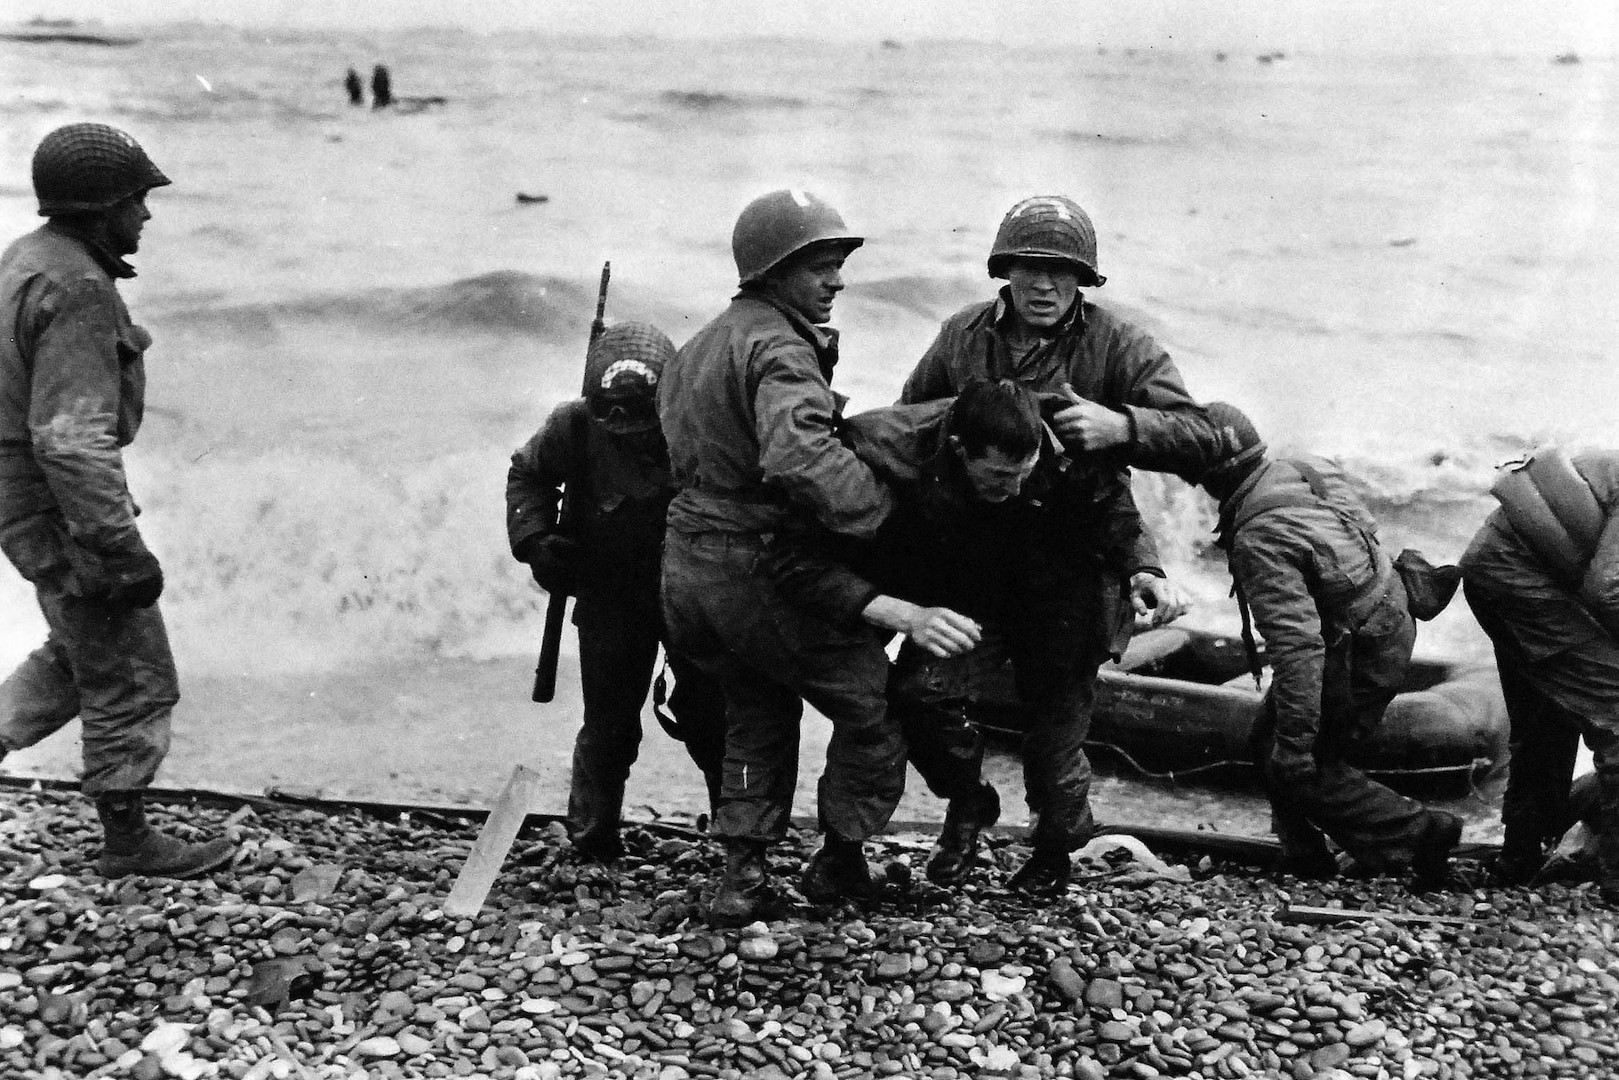 Members of American landing party carry comrades ashore from life raft somewhere in Northern France after their landing craft was sunk, June 6, 1944 (U.S. Army Signal Corps)